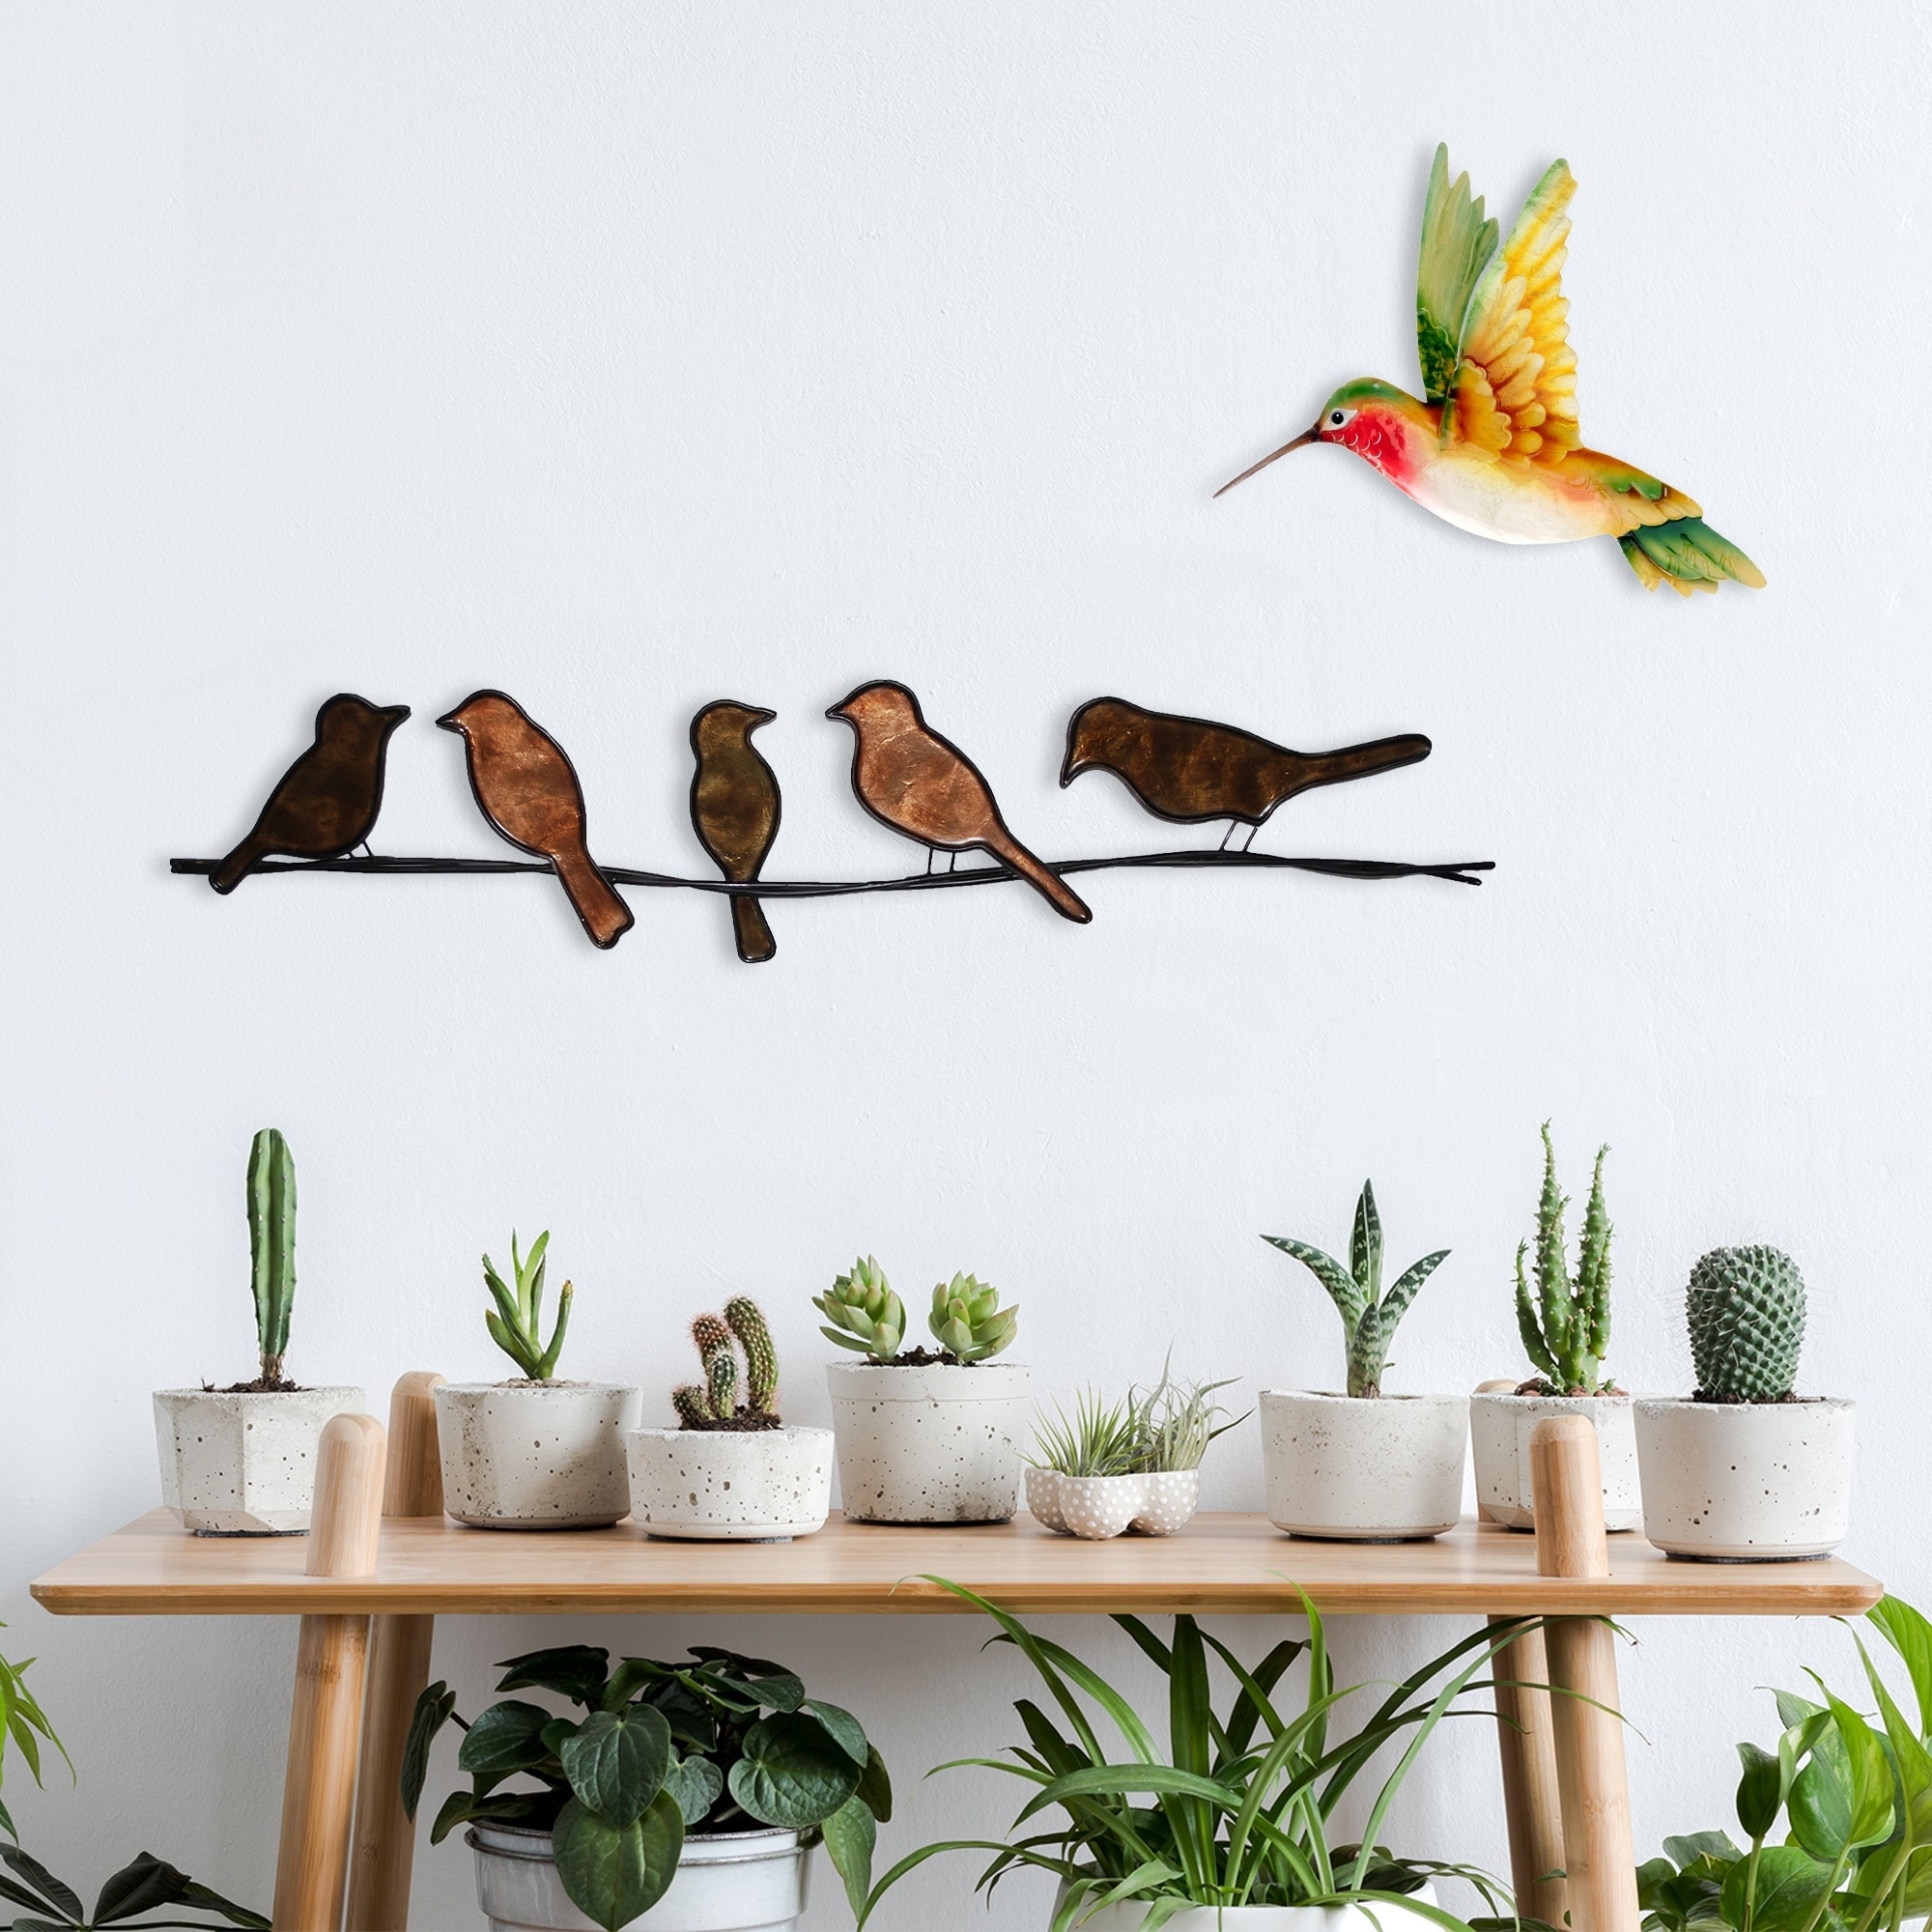 Birds On A Wire x 28.5 Bed - - 6 18801959 - - x Sale On Bath & 1 Beyond